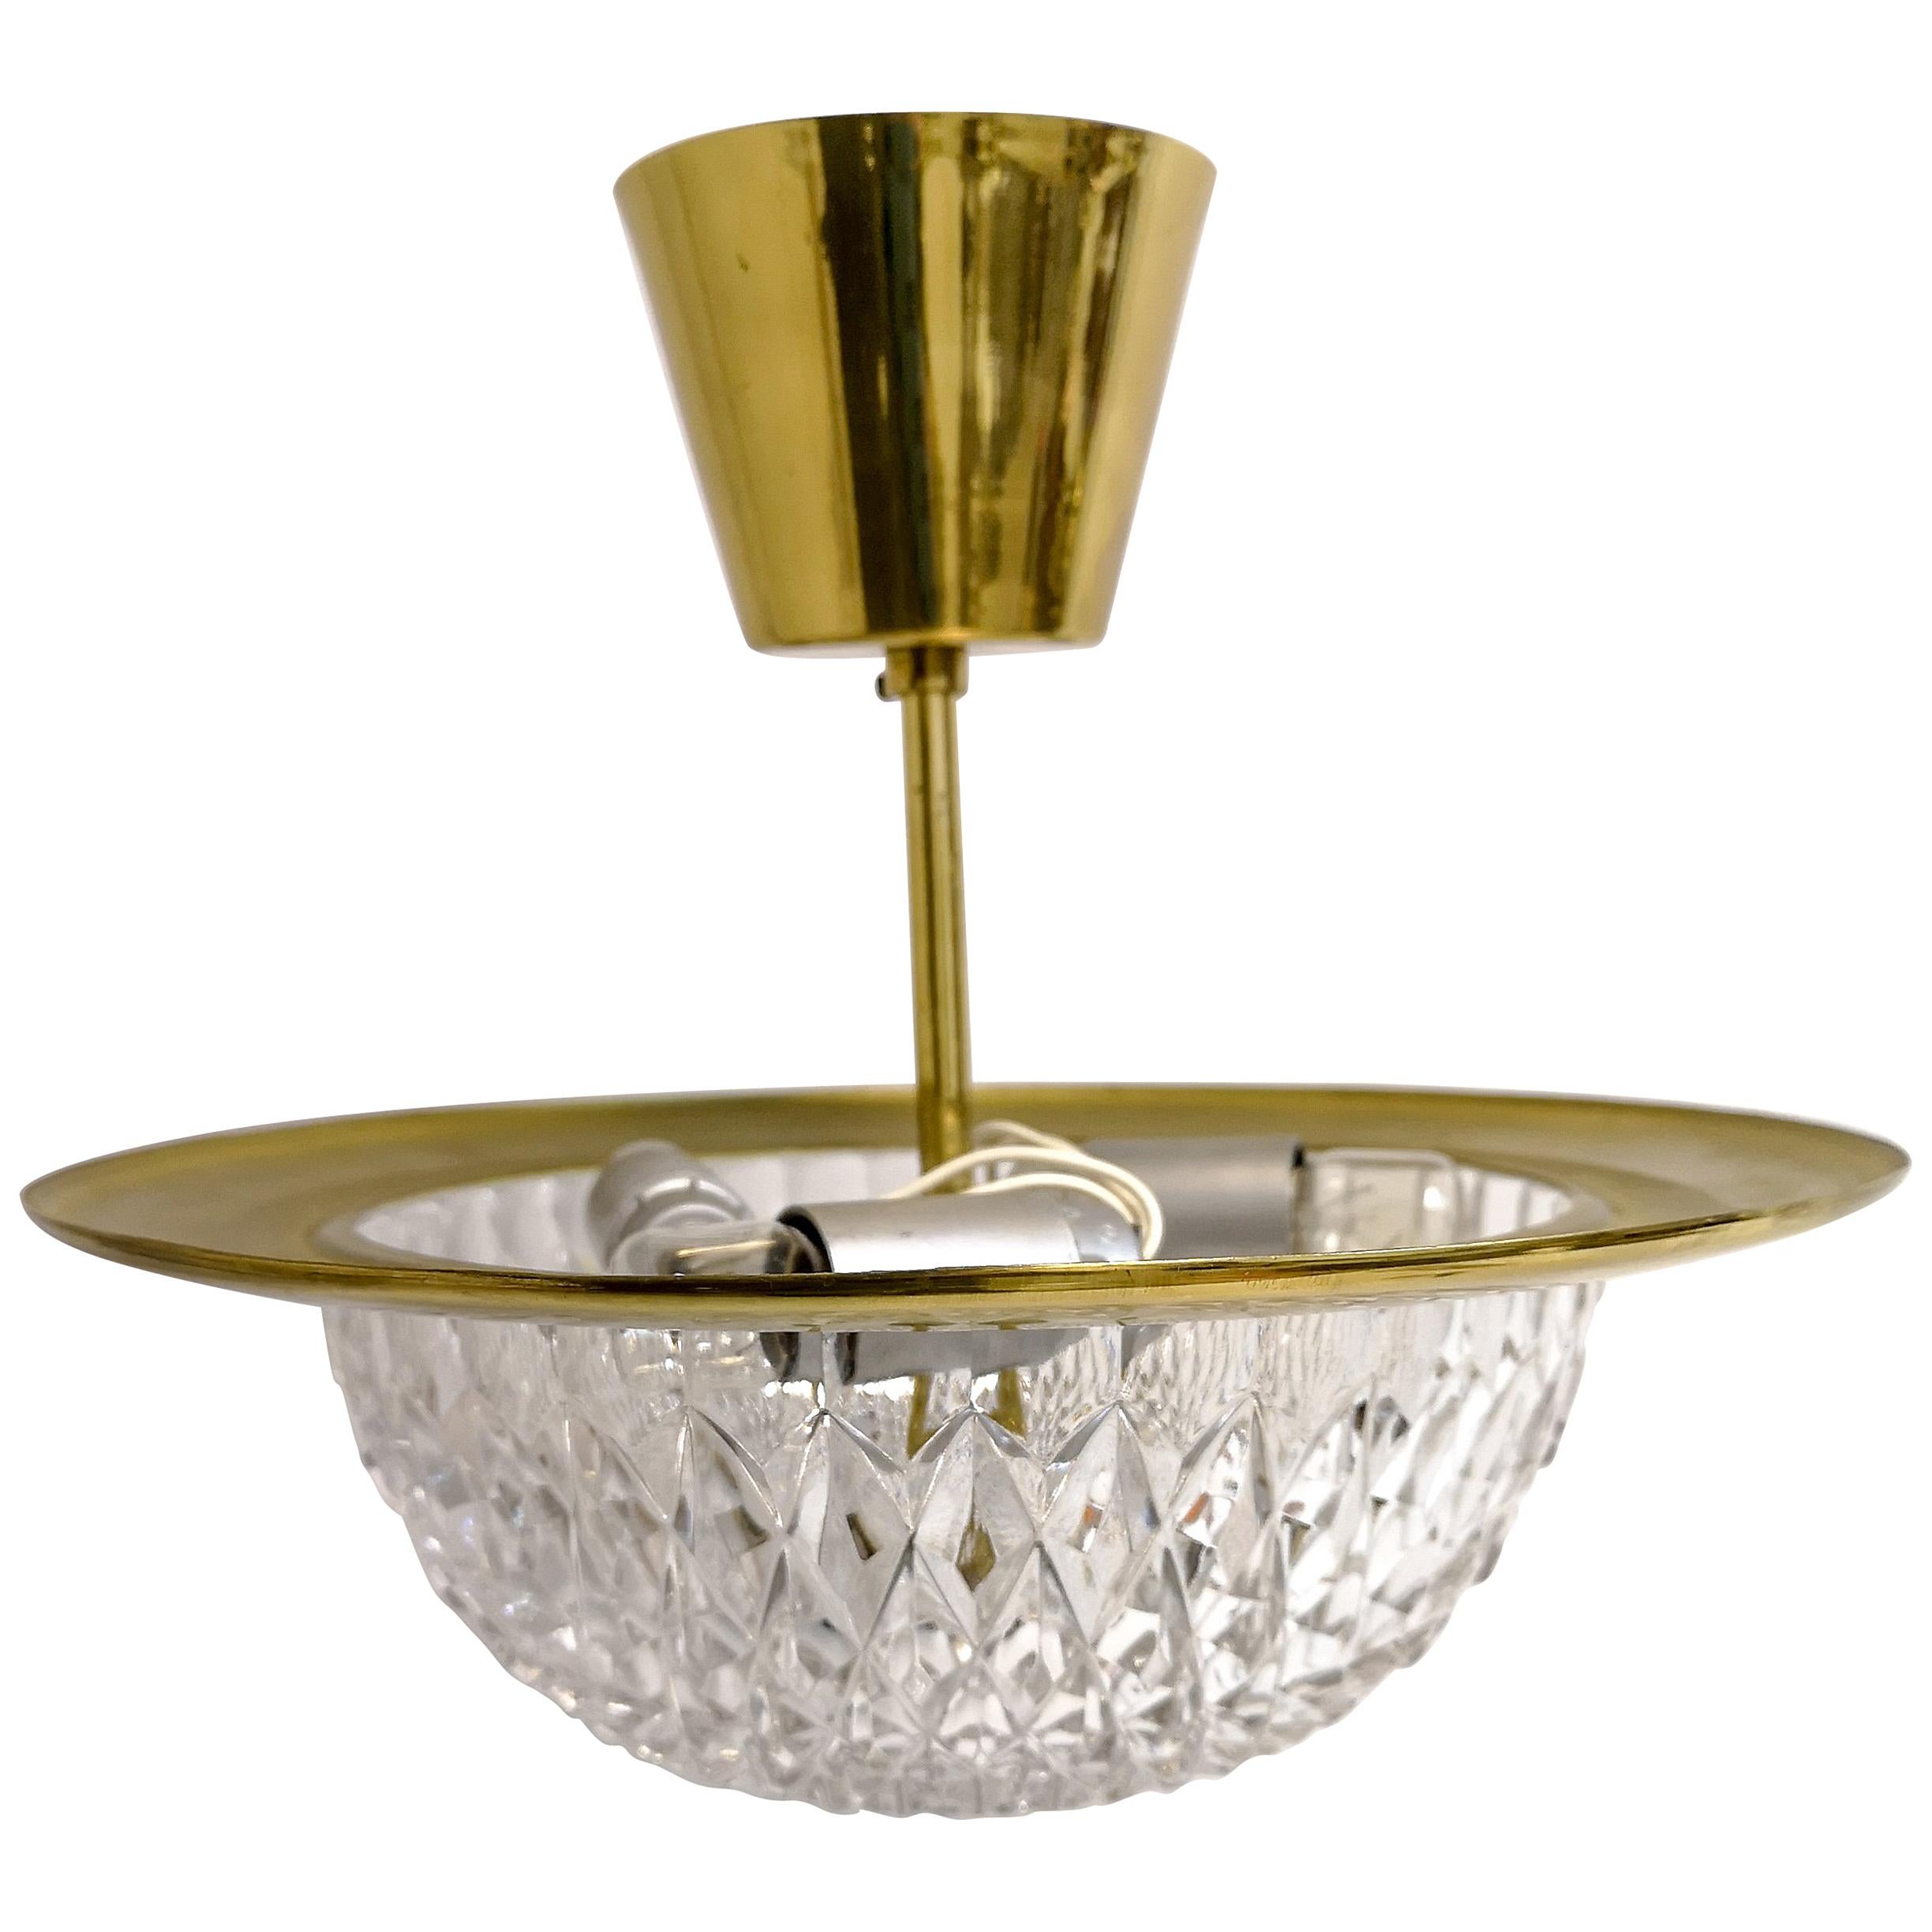 1960s, Brass and Crystal Celling Lamp by Tyringe for Orrefors, Sweden